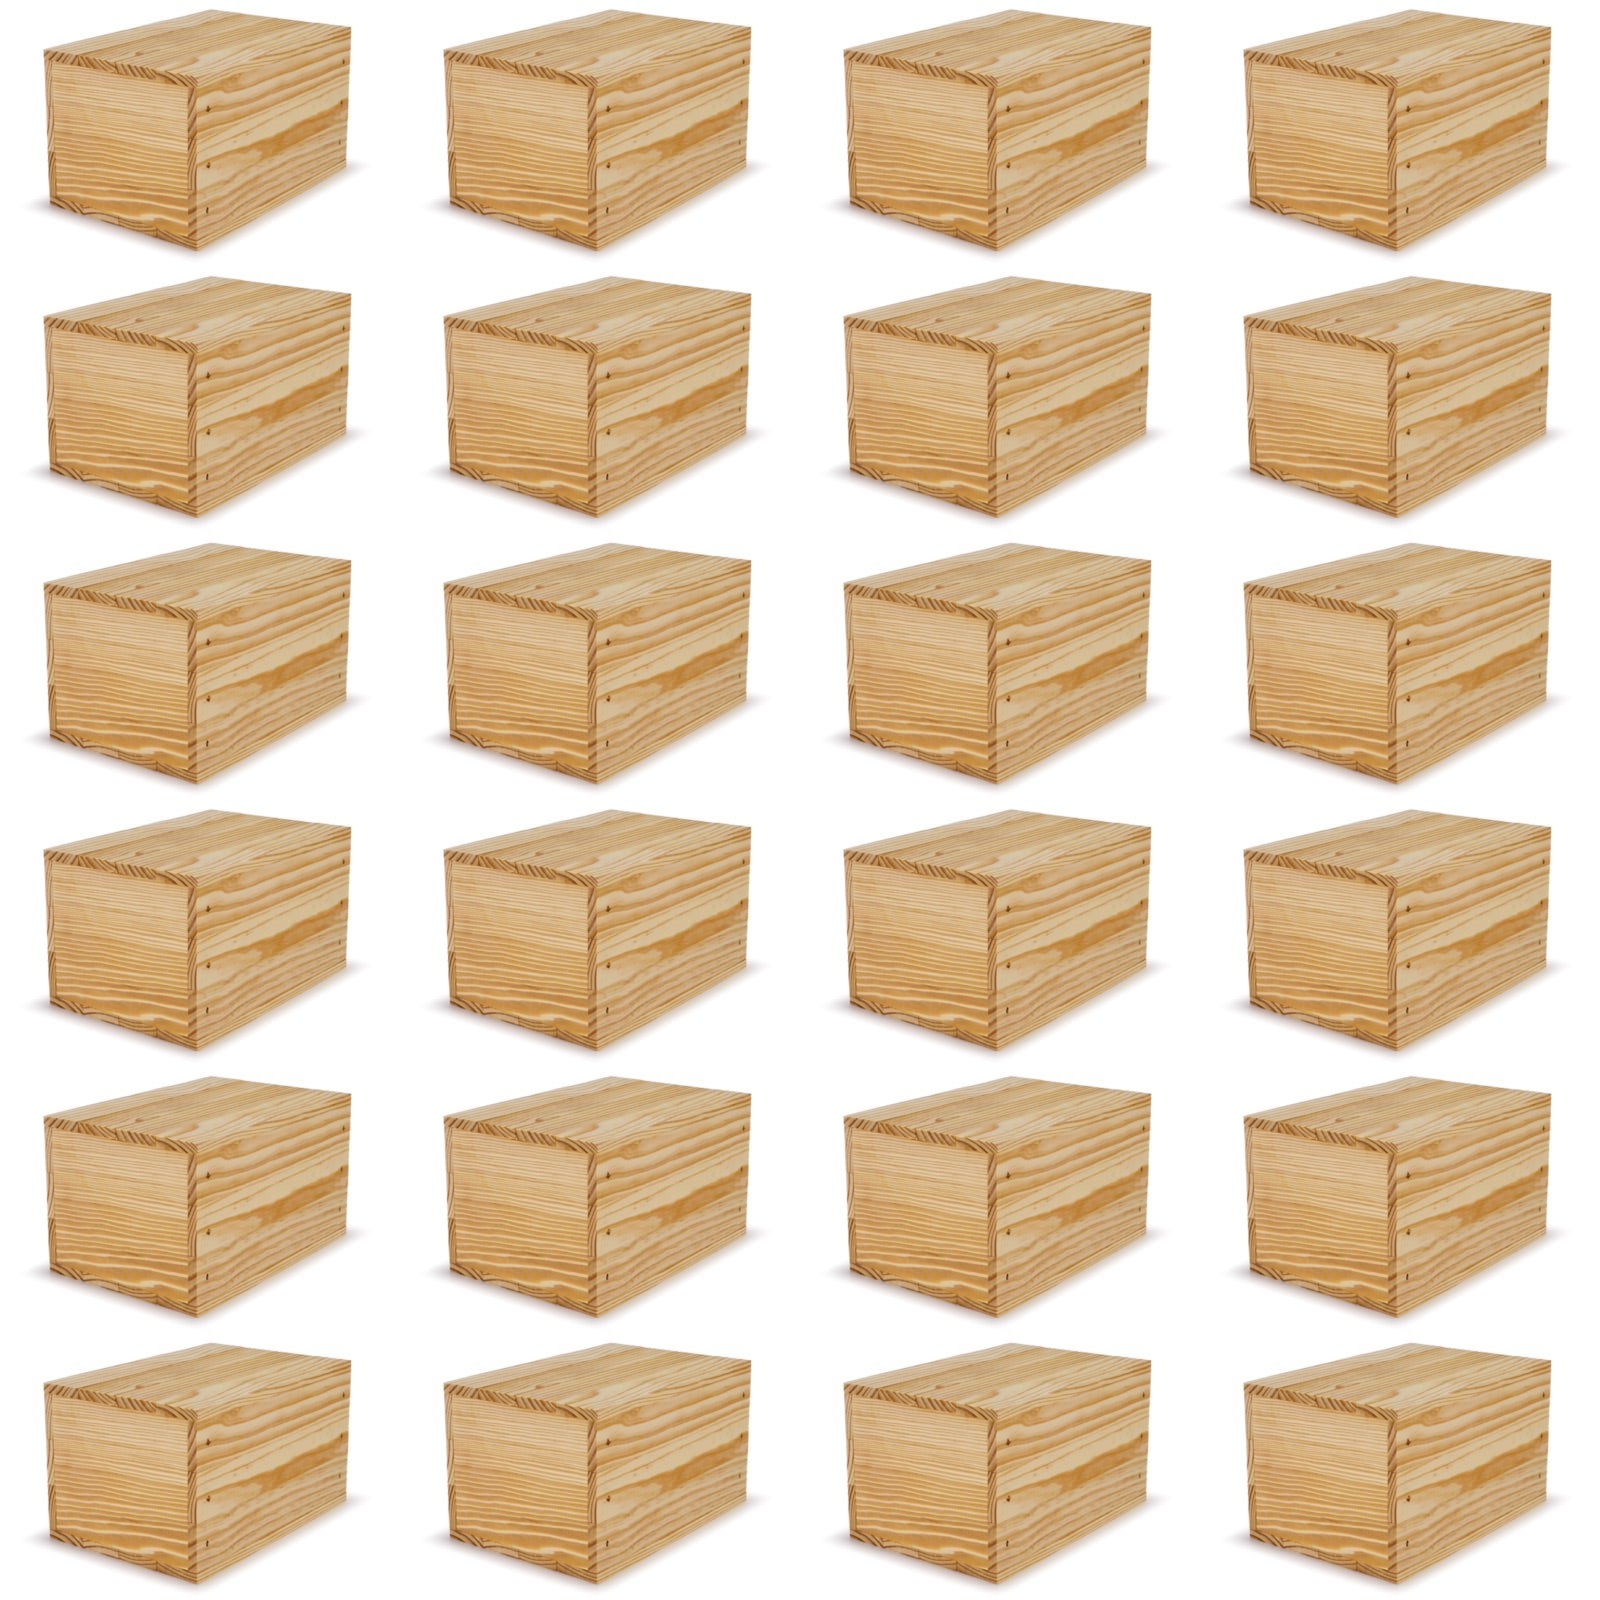 24 Small wooden crates with lid 9x6.25x5.25